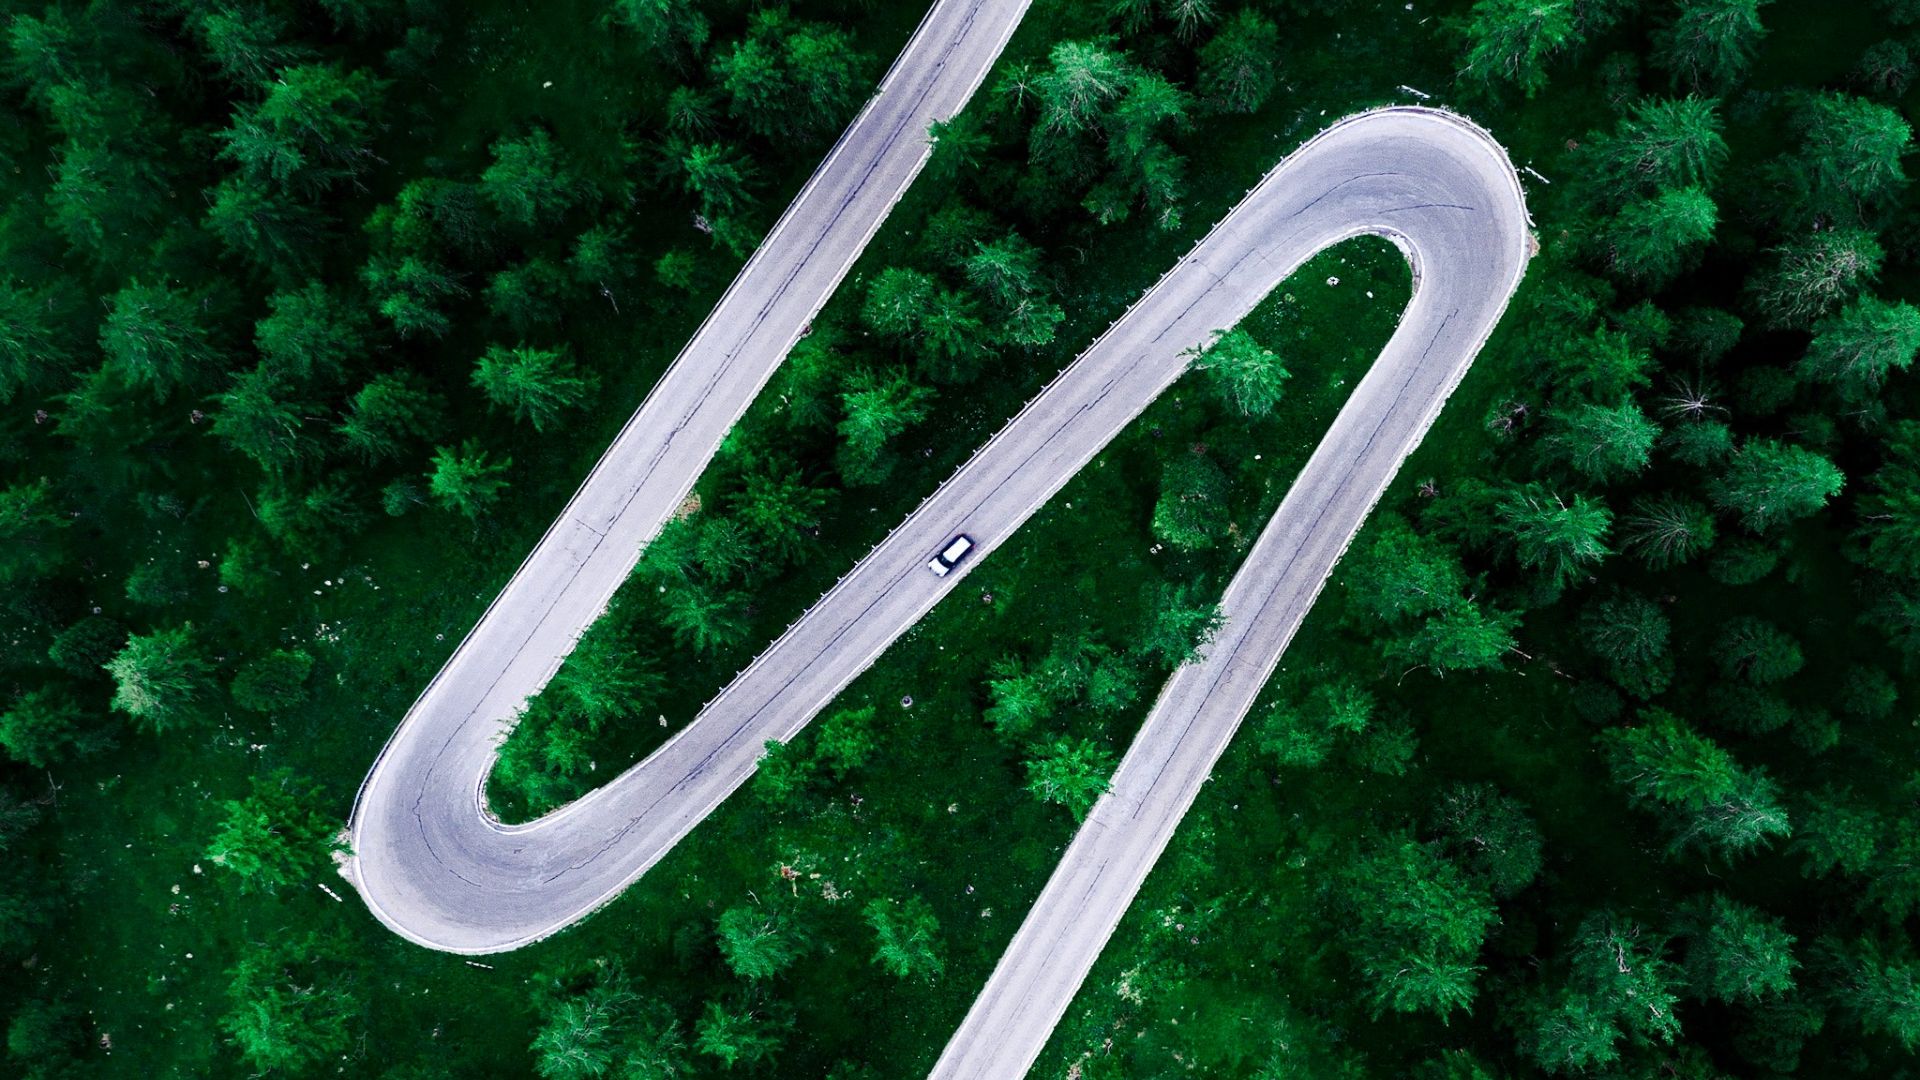 Road winding through a forest with an aerial view of a car